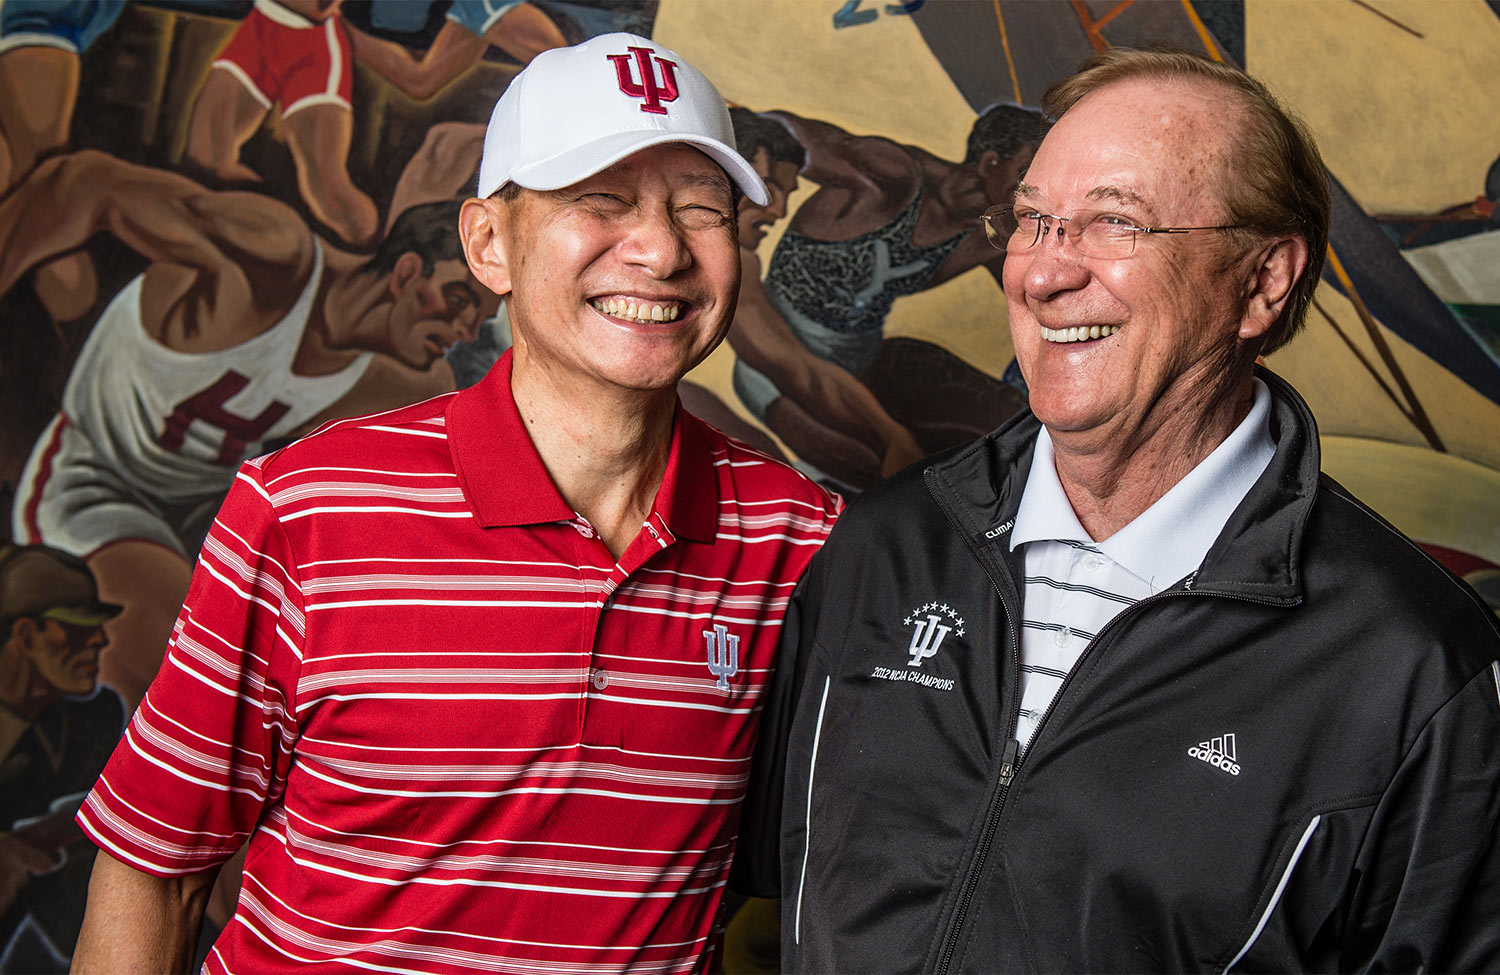 Peter Wong and retired Indiana University men’s soccer coach Jerry Yeagley smile as they reminisce.